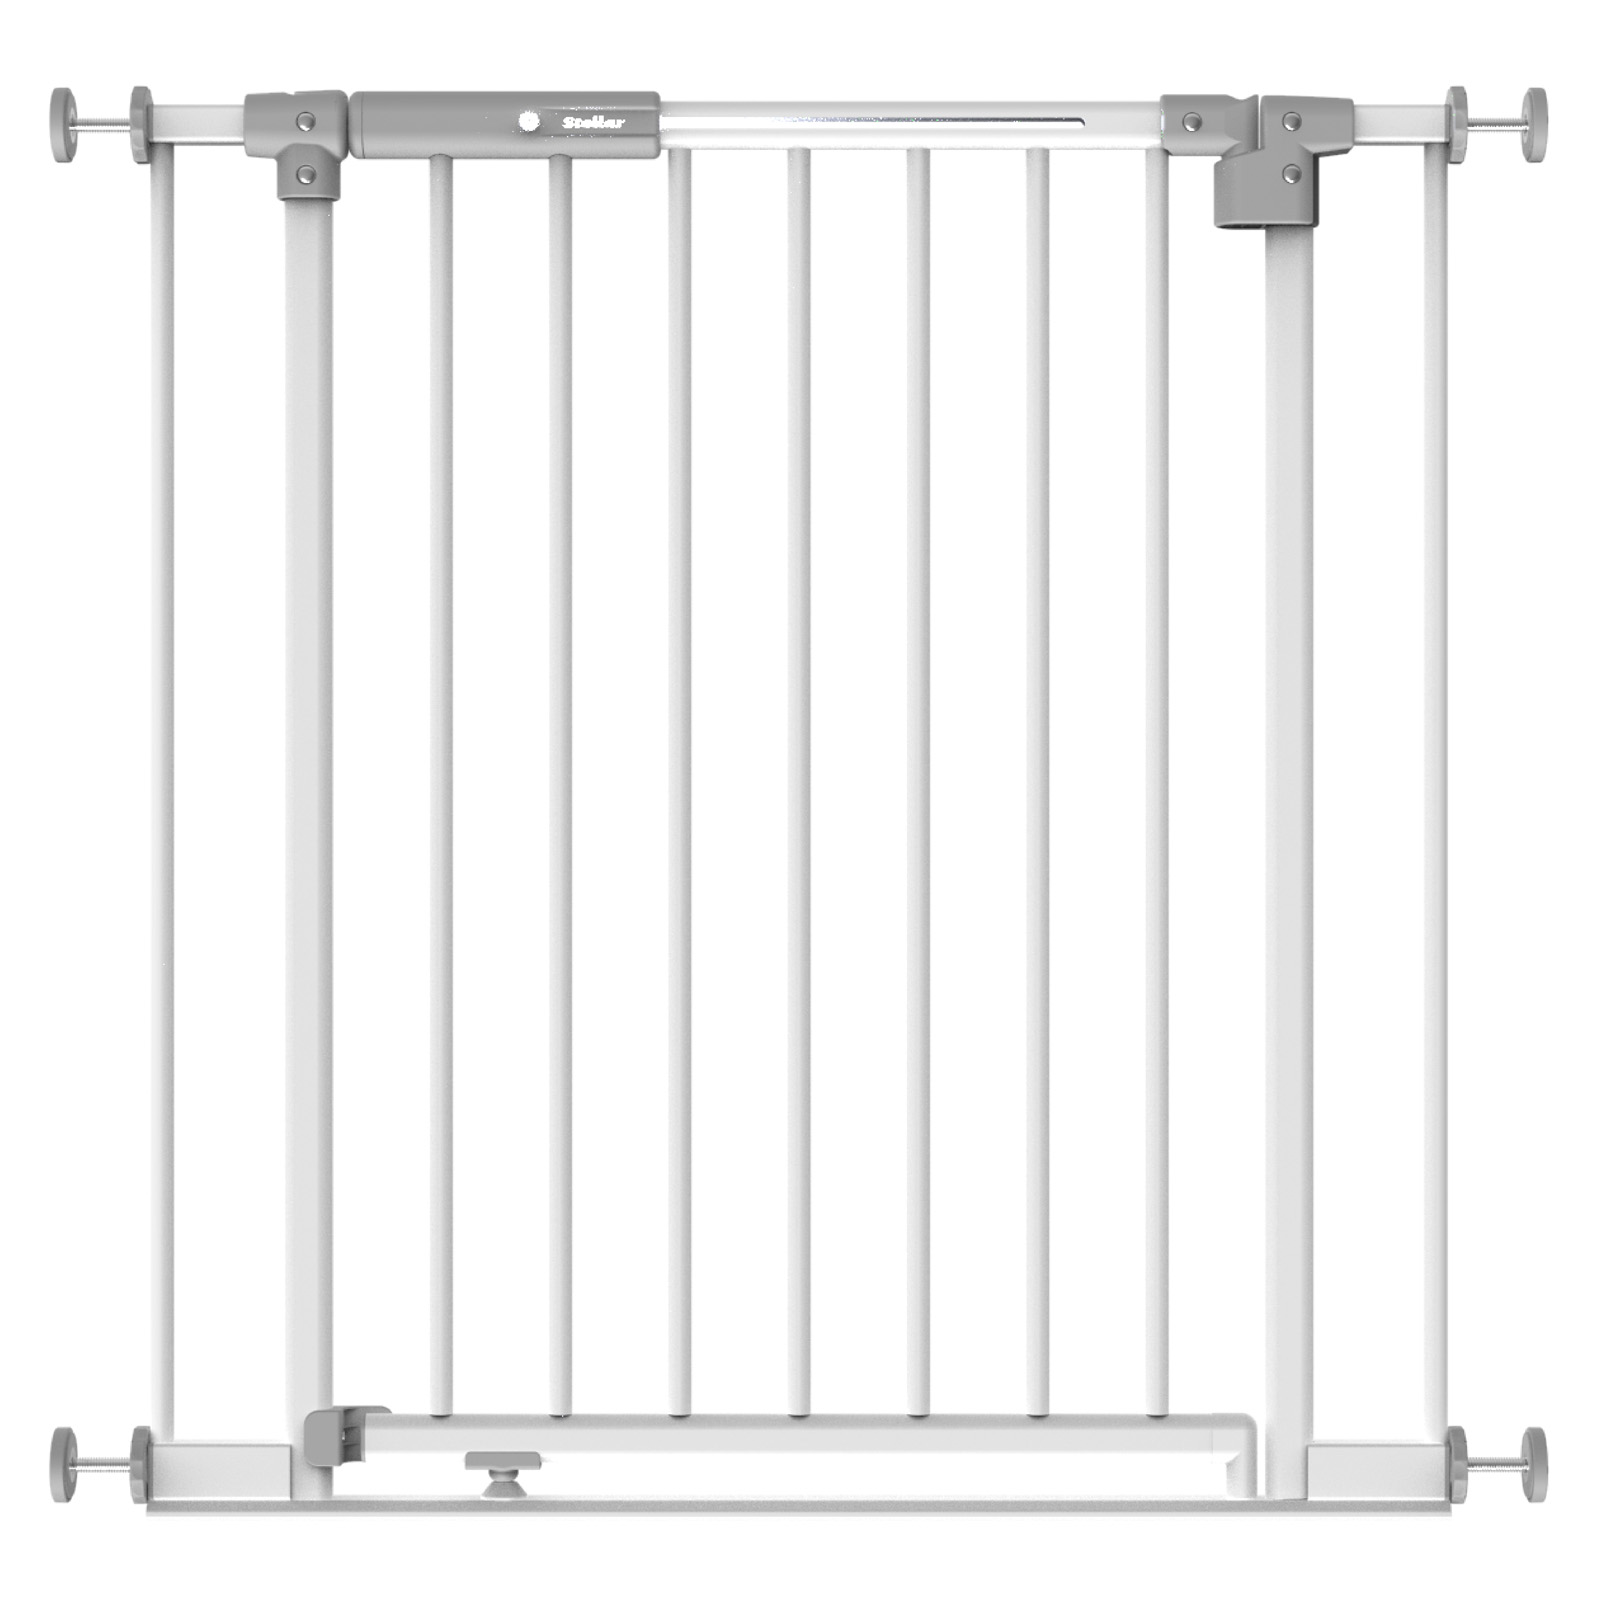 Perma Stellar LED Baby Gate for 6-24 Months, 30" Tall x 28.8"-32.3", Safe Step & Auto Lock, White - image 1 of 9